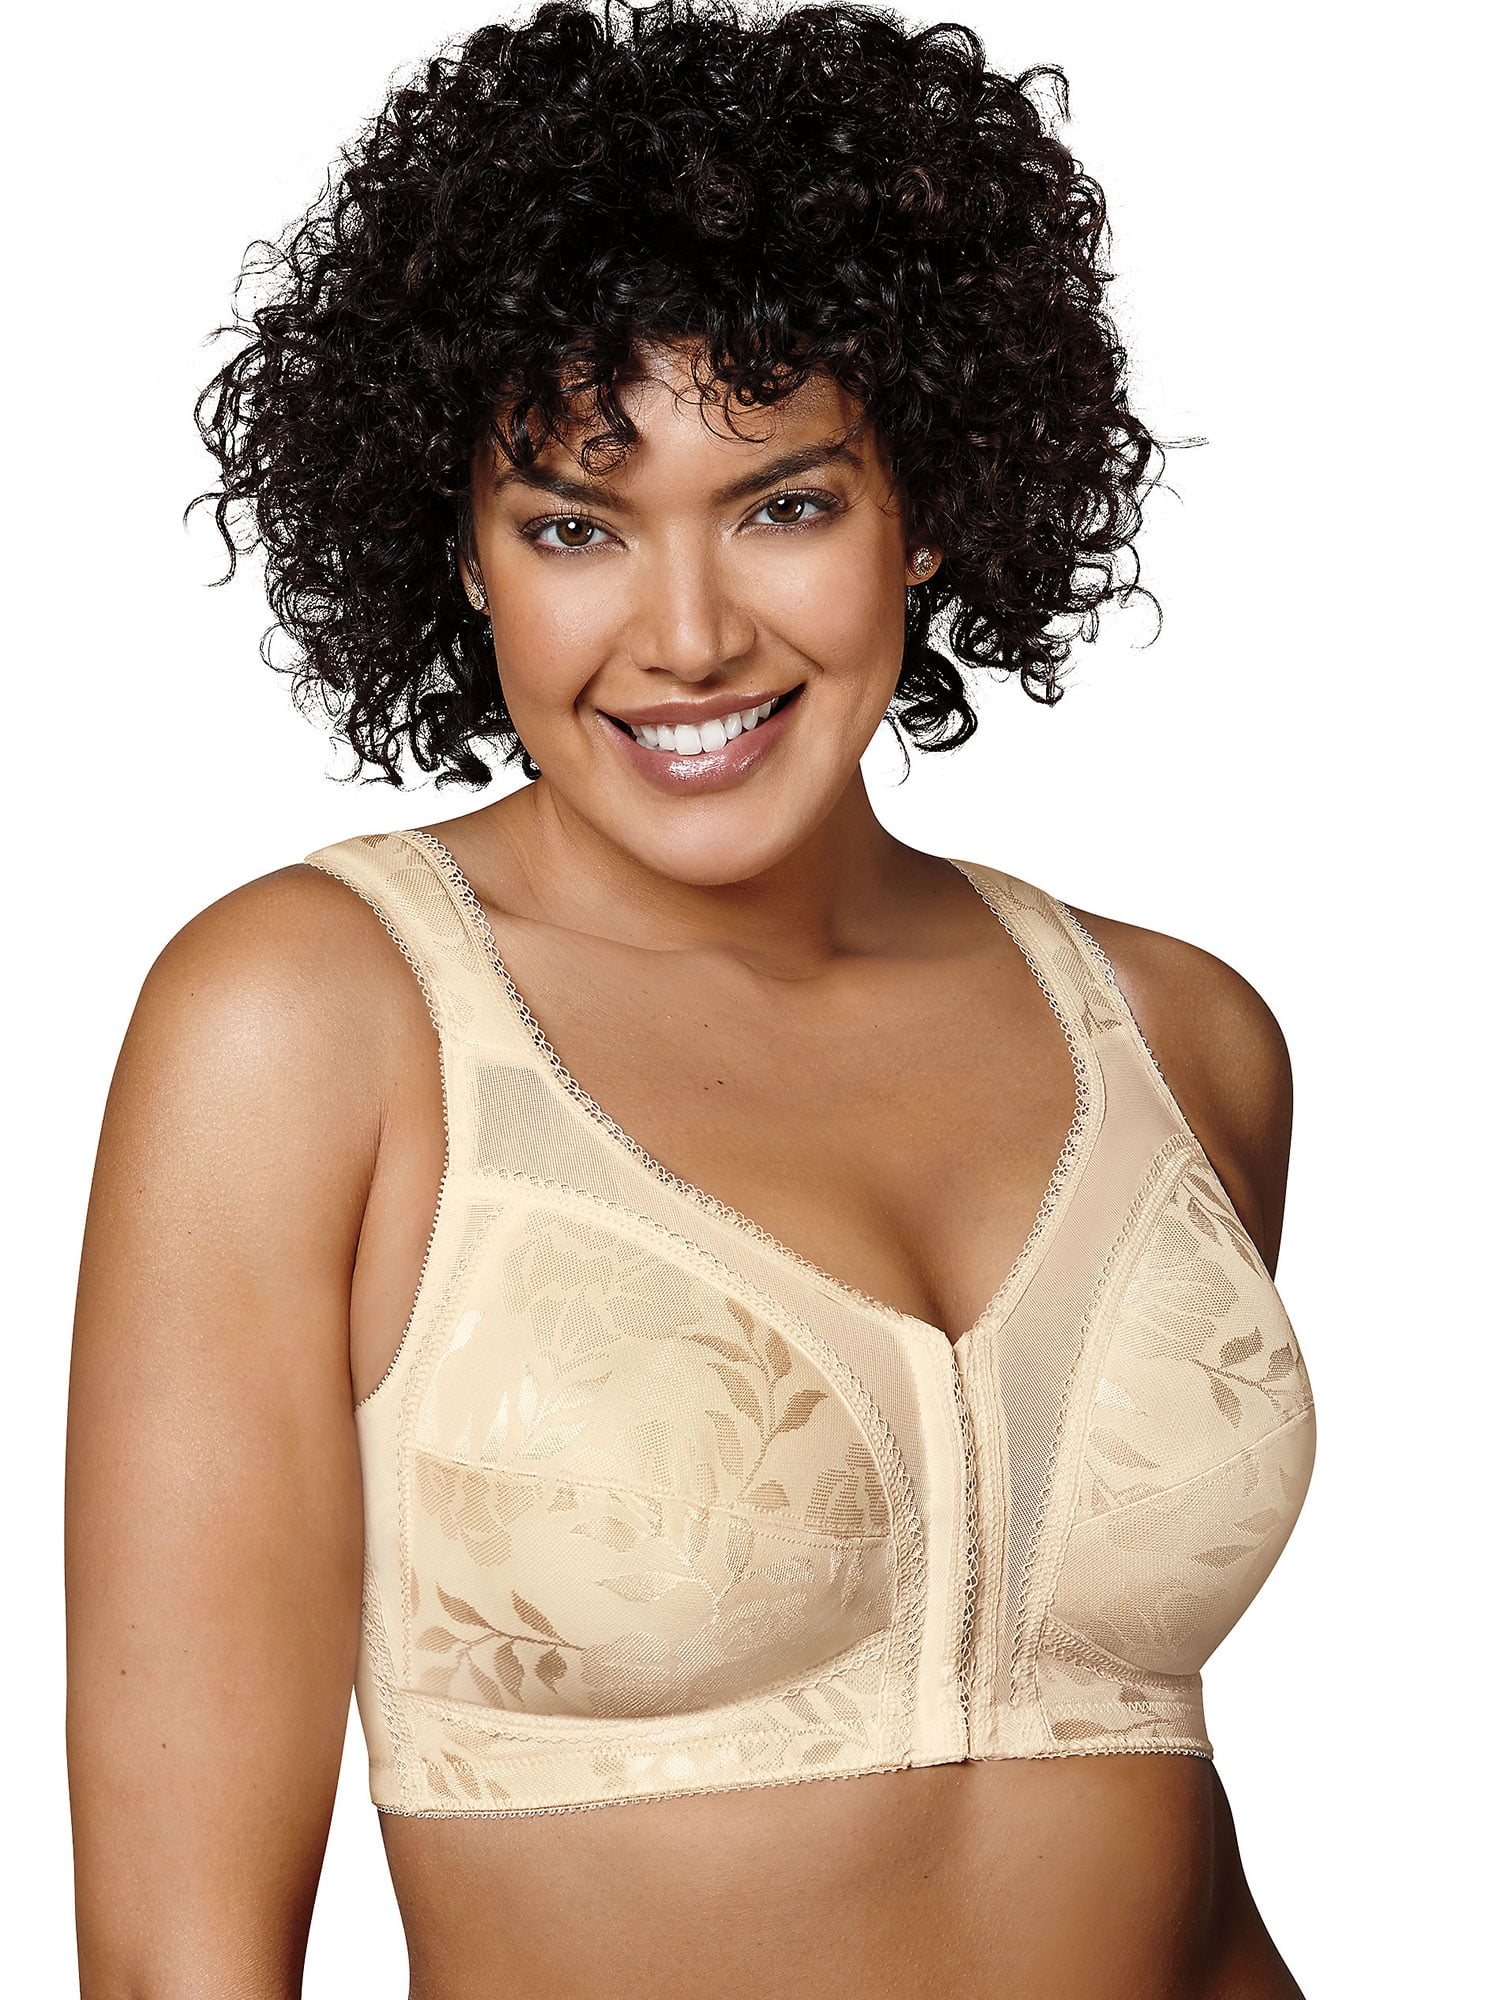 Playtex 18 Hour Front Closing Wire-free Posture Bra - Nude